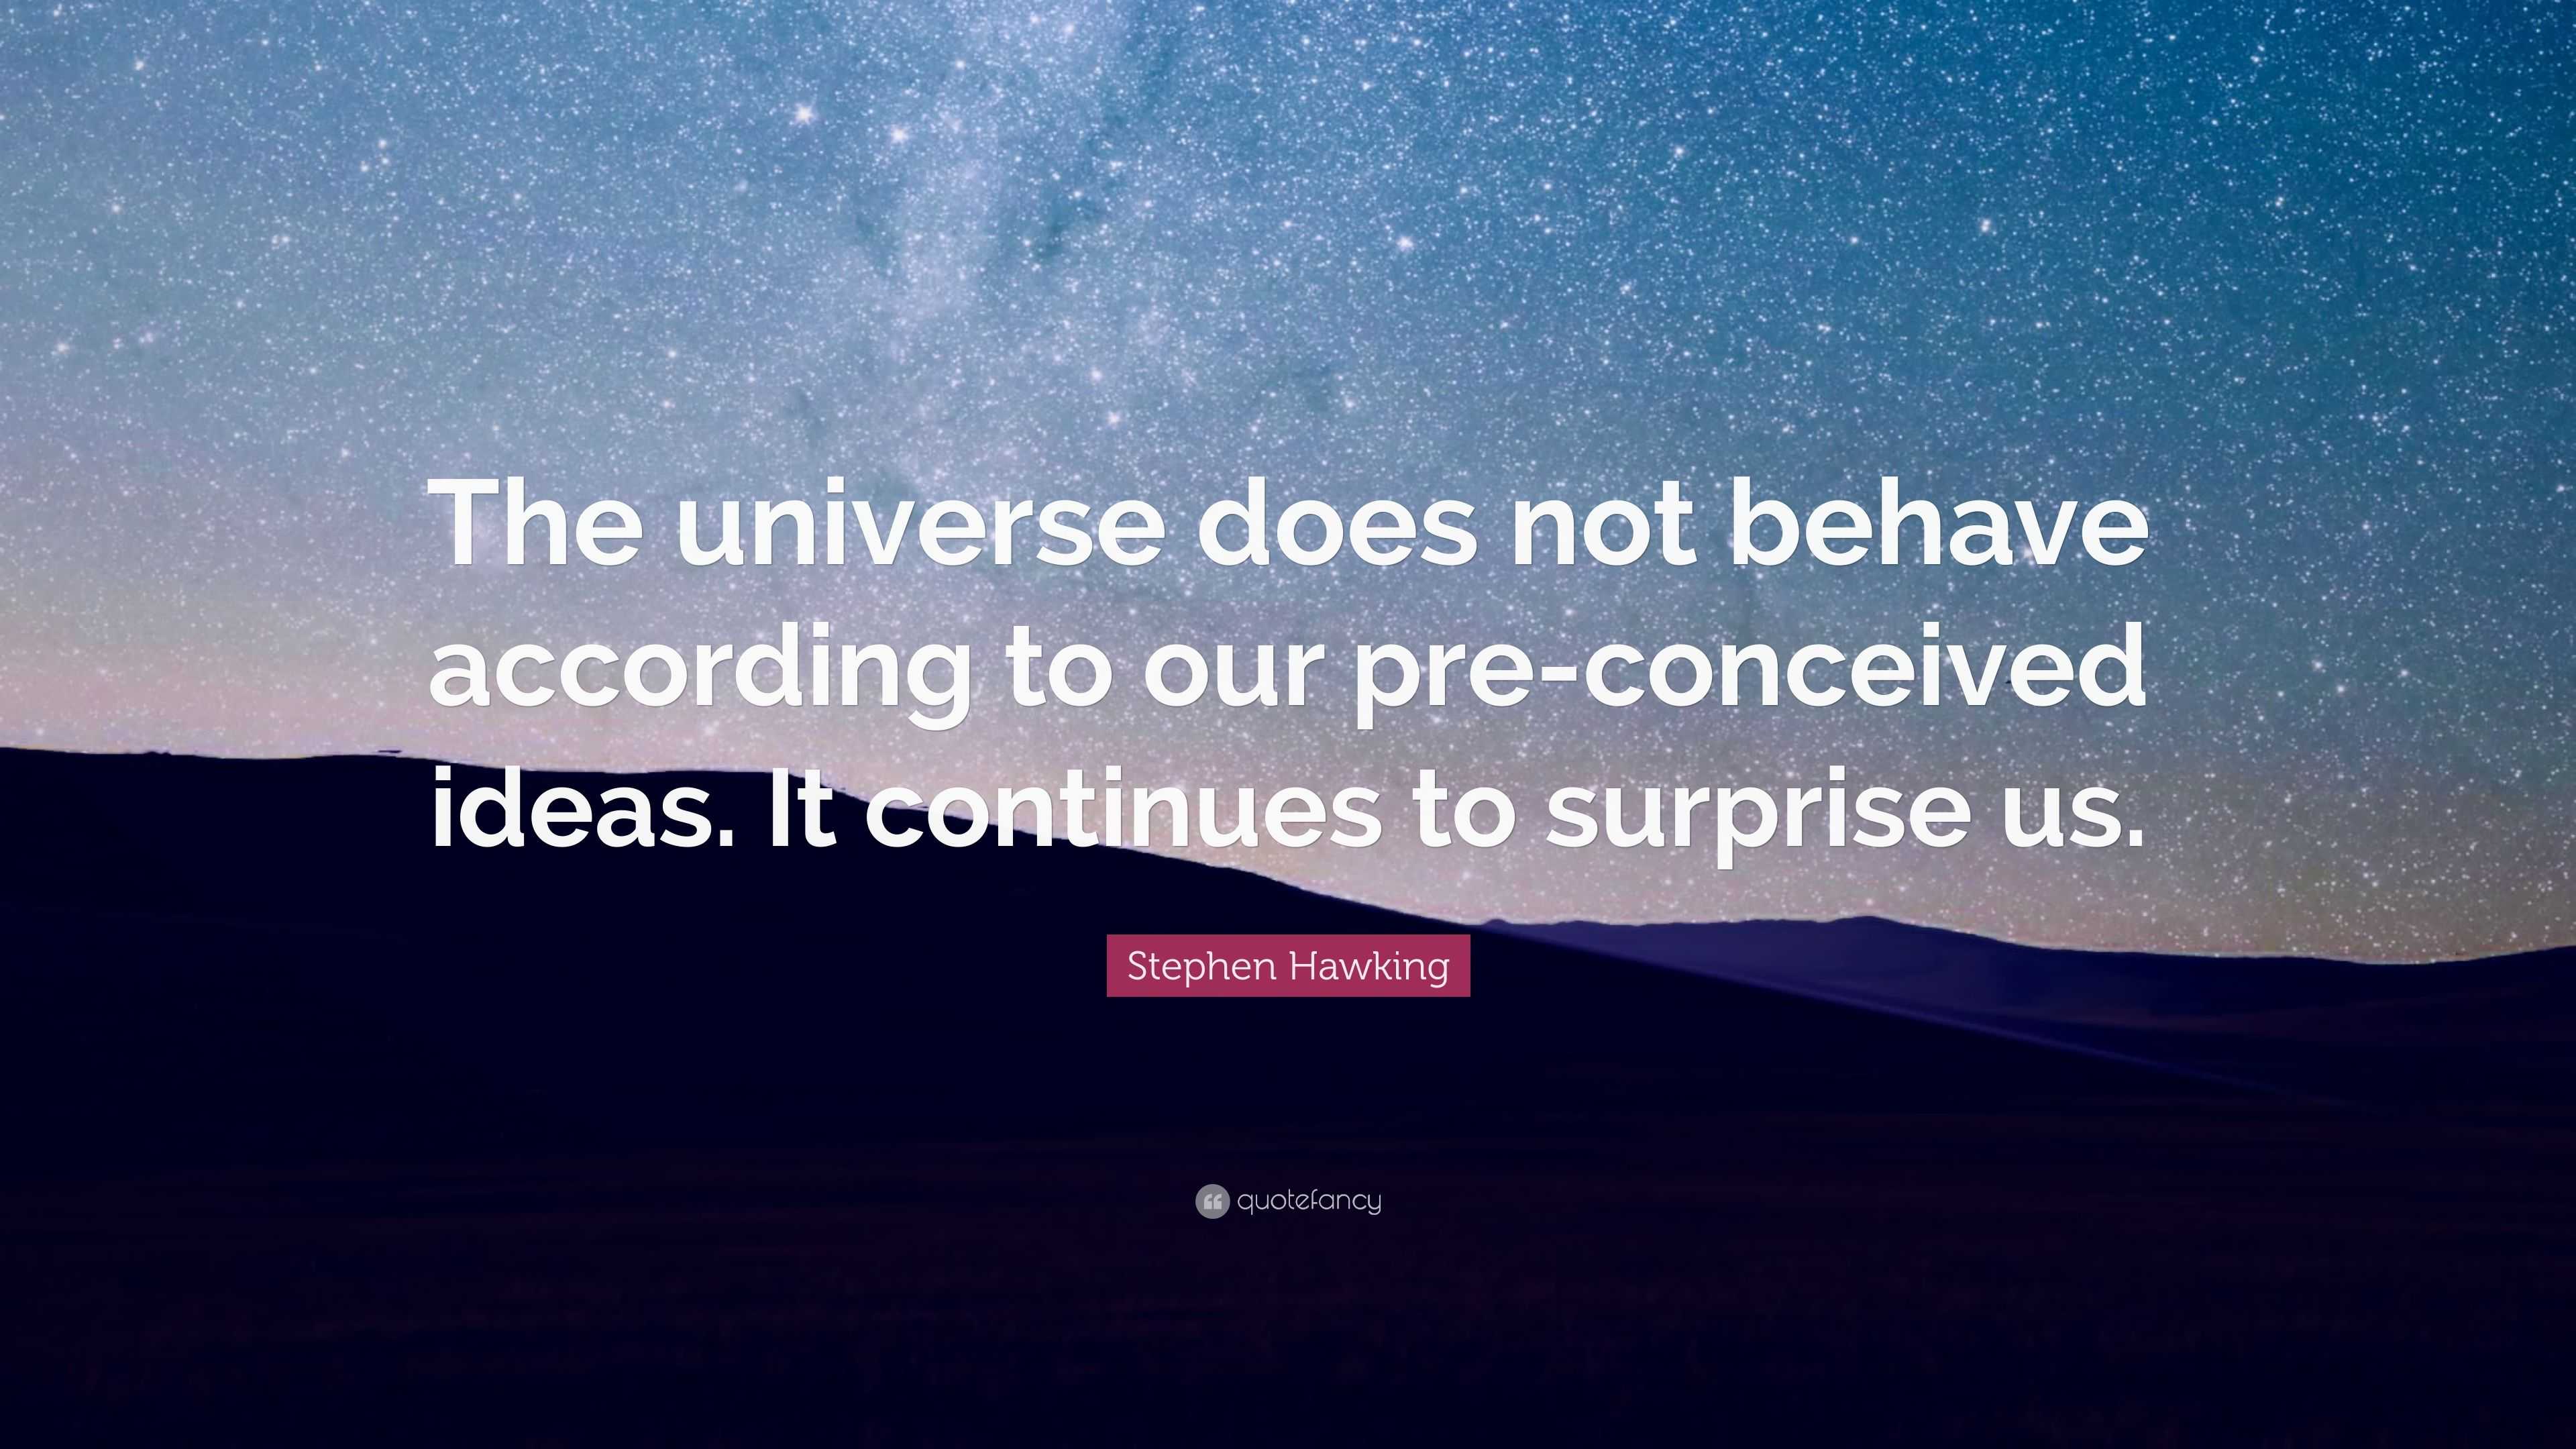 Stephen Hawking Quote: “The universe does not behave according to our ...